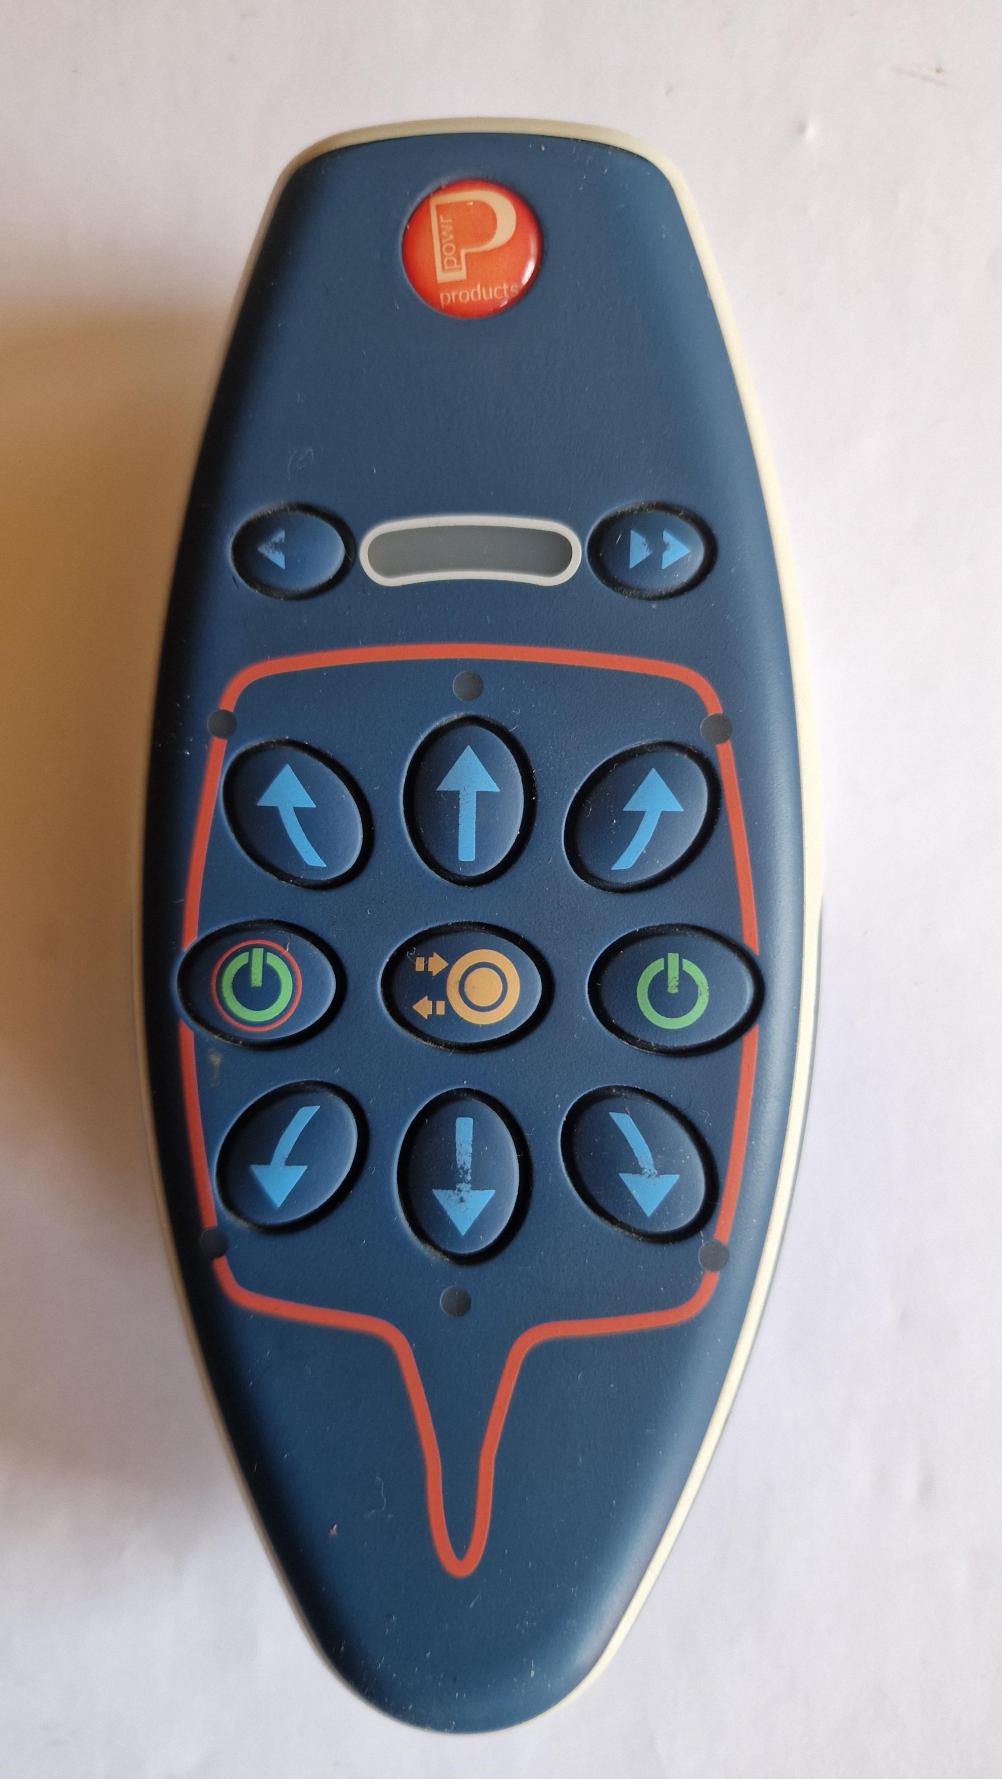 Powr touch  Remote Control - Front Image